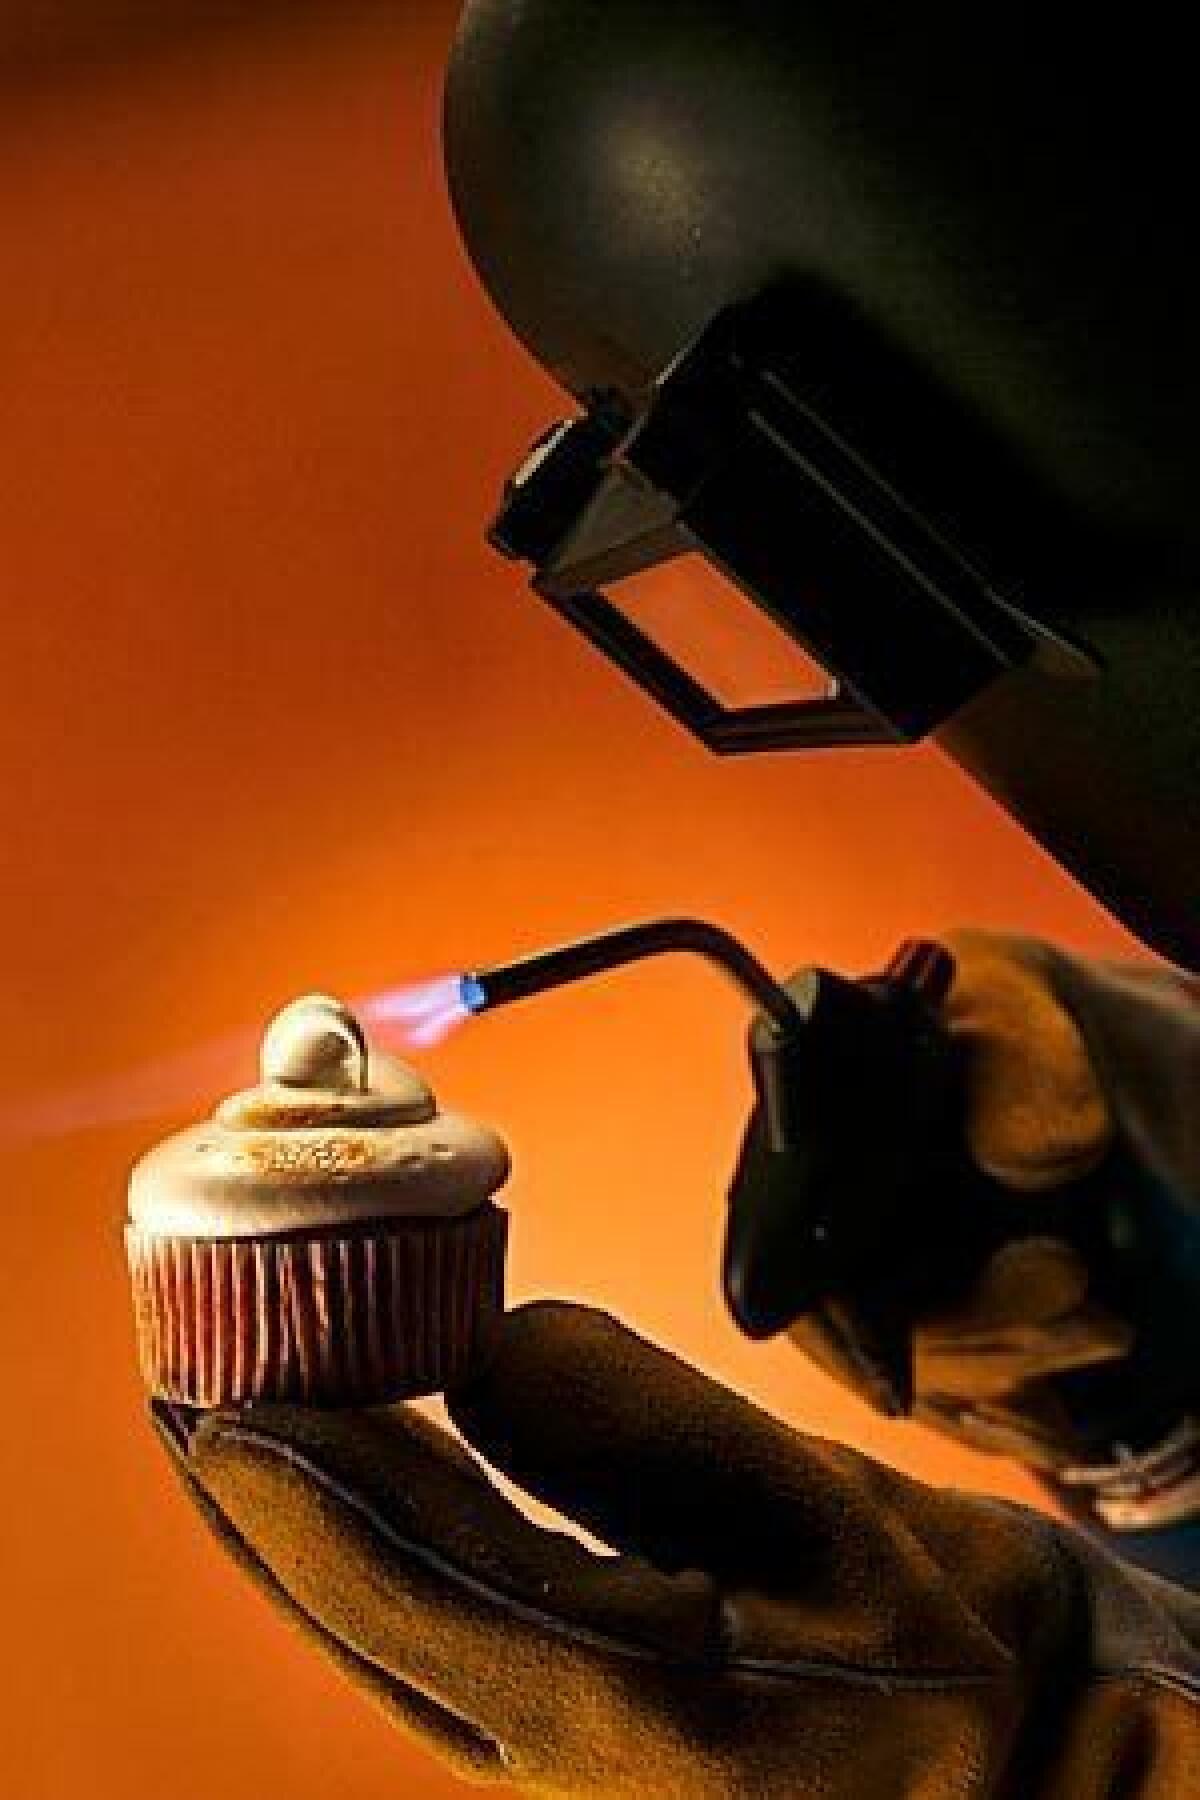 Food cover shot for a story about using a blowtorch in the kitchen. We were looking for a somewhat humorous approach to the shot, taking the theatrics of kitchen pyrotechnics one step further by adding a welder's mask and gloves to an otherwise simple shot of bruleeing a s'mores cupcake. Click here for the story.